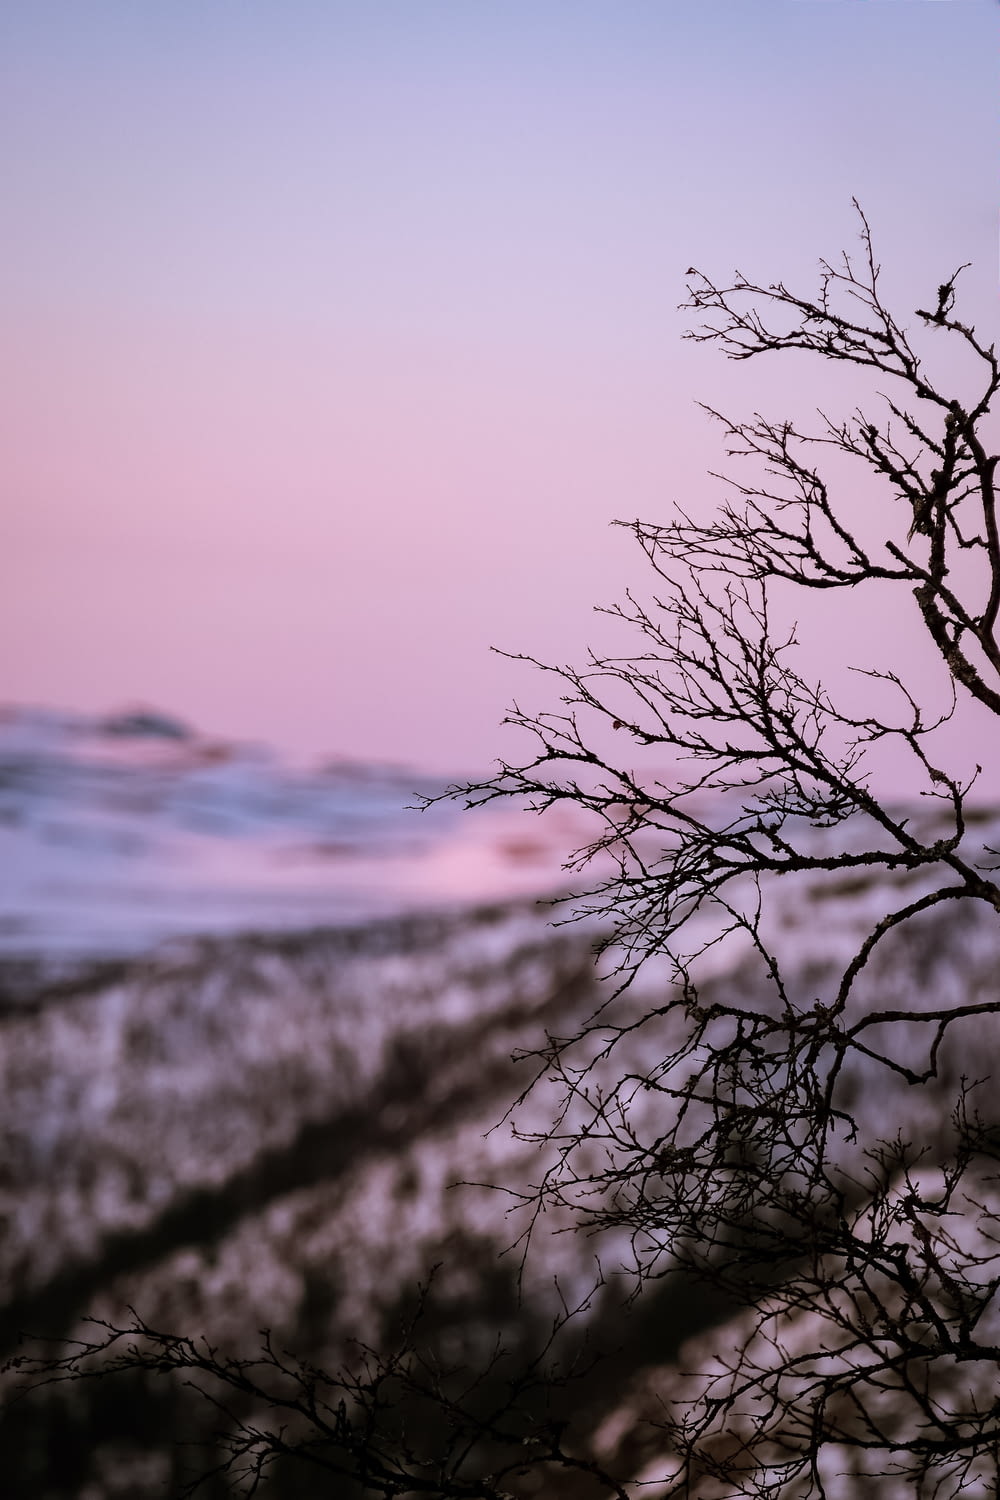 a bare tree in the foreground with a pink sky in the background